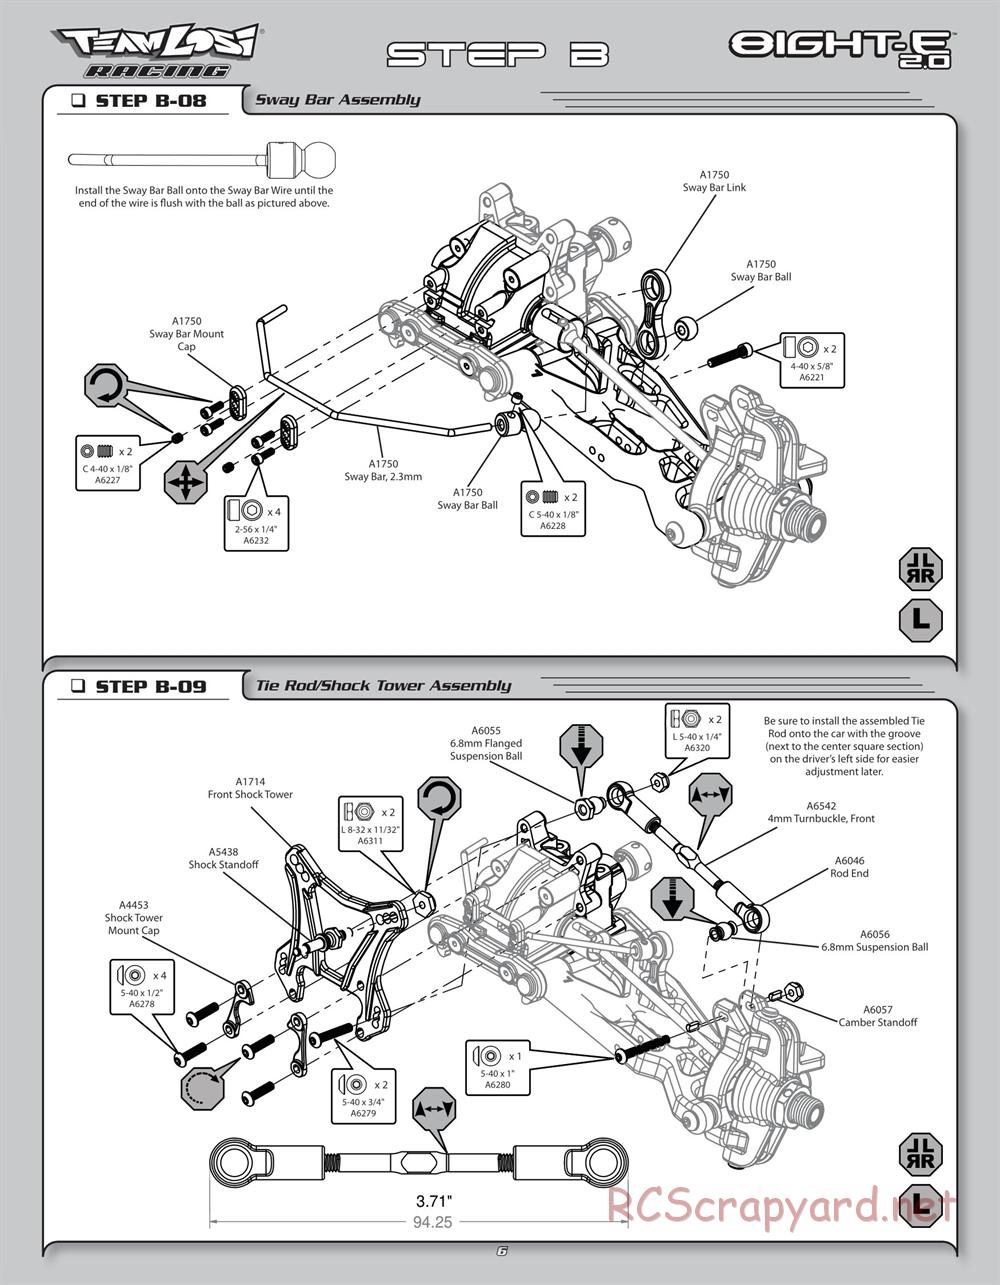 Team Losi - 8ight-E 2.0 Race Roller - Manual - Page 9